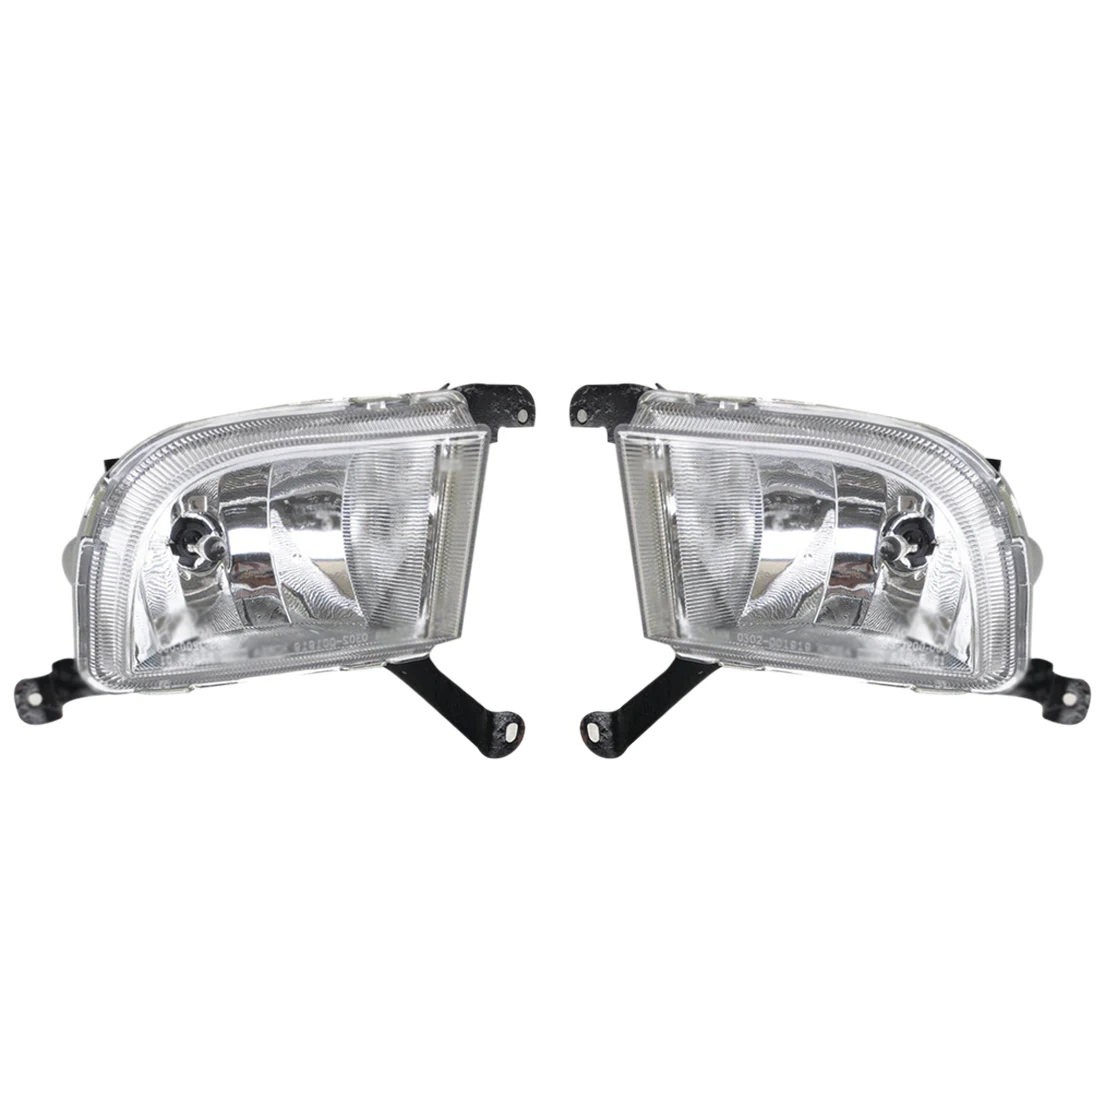 

Car Front Bumper Fog Light with Lamp Bulb for Daewoo for Chevrolet Lacetti/Optra 4DR for Buick Hrv 2003-2007